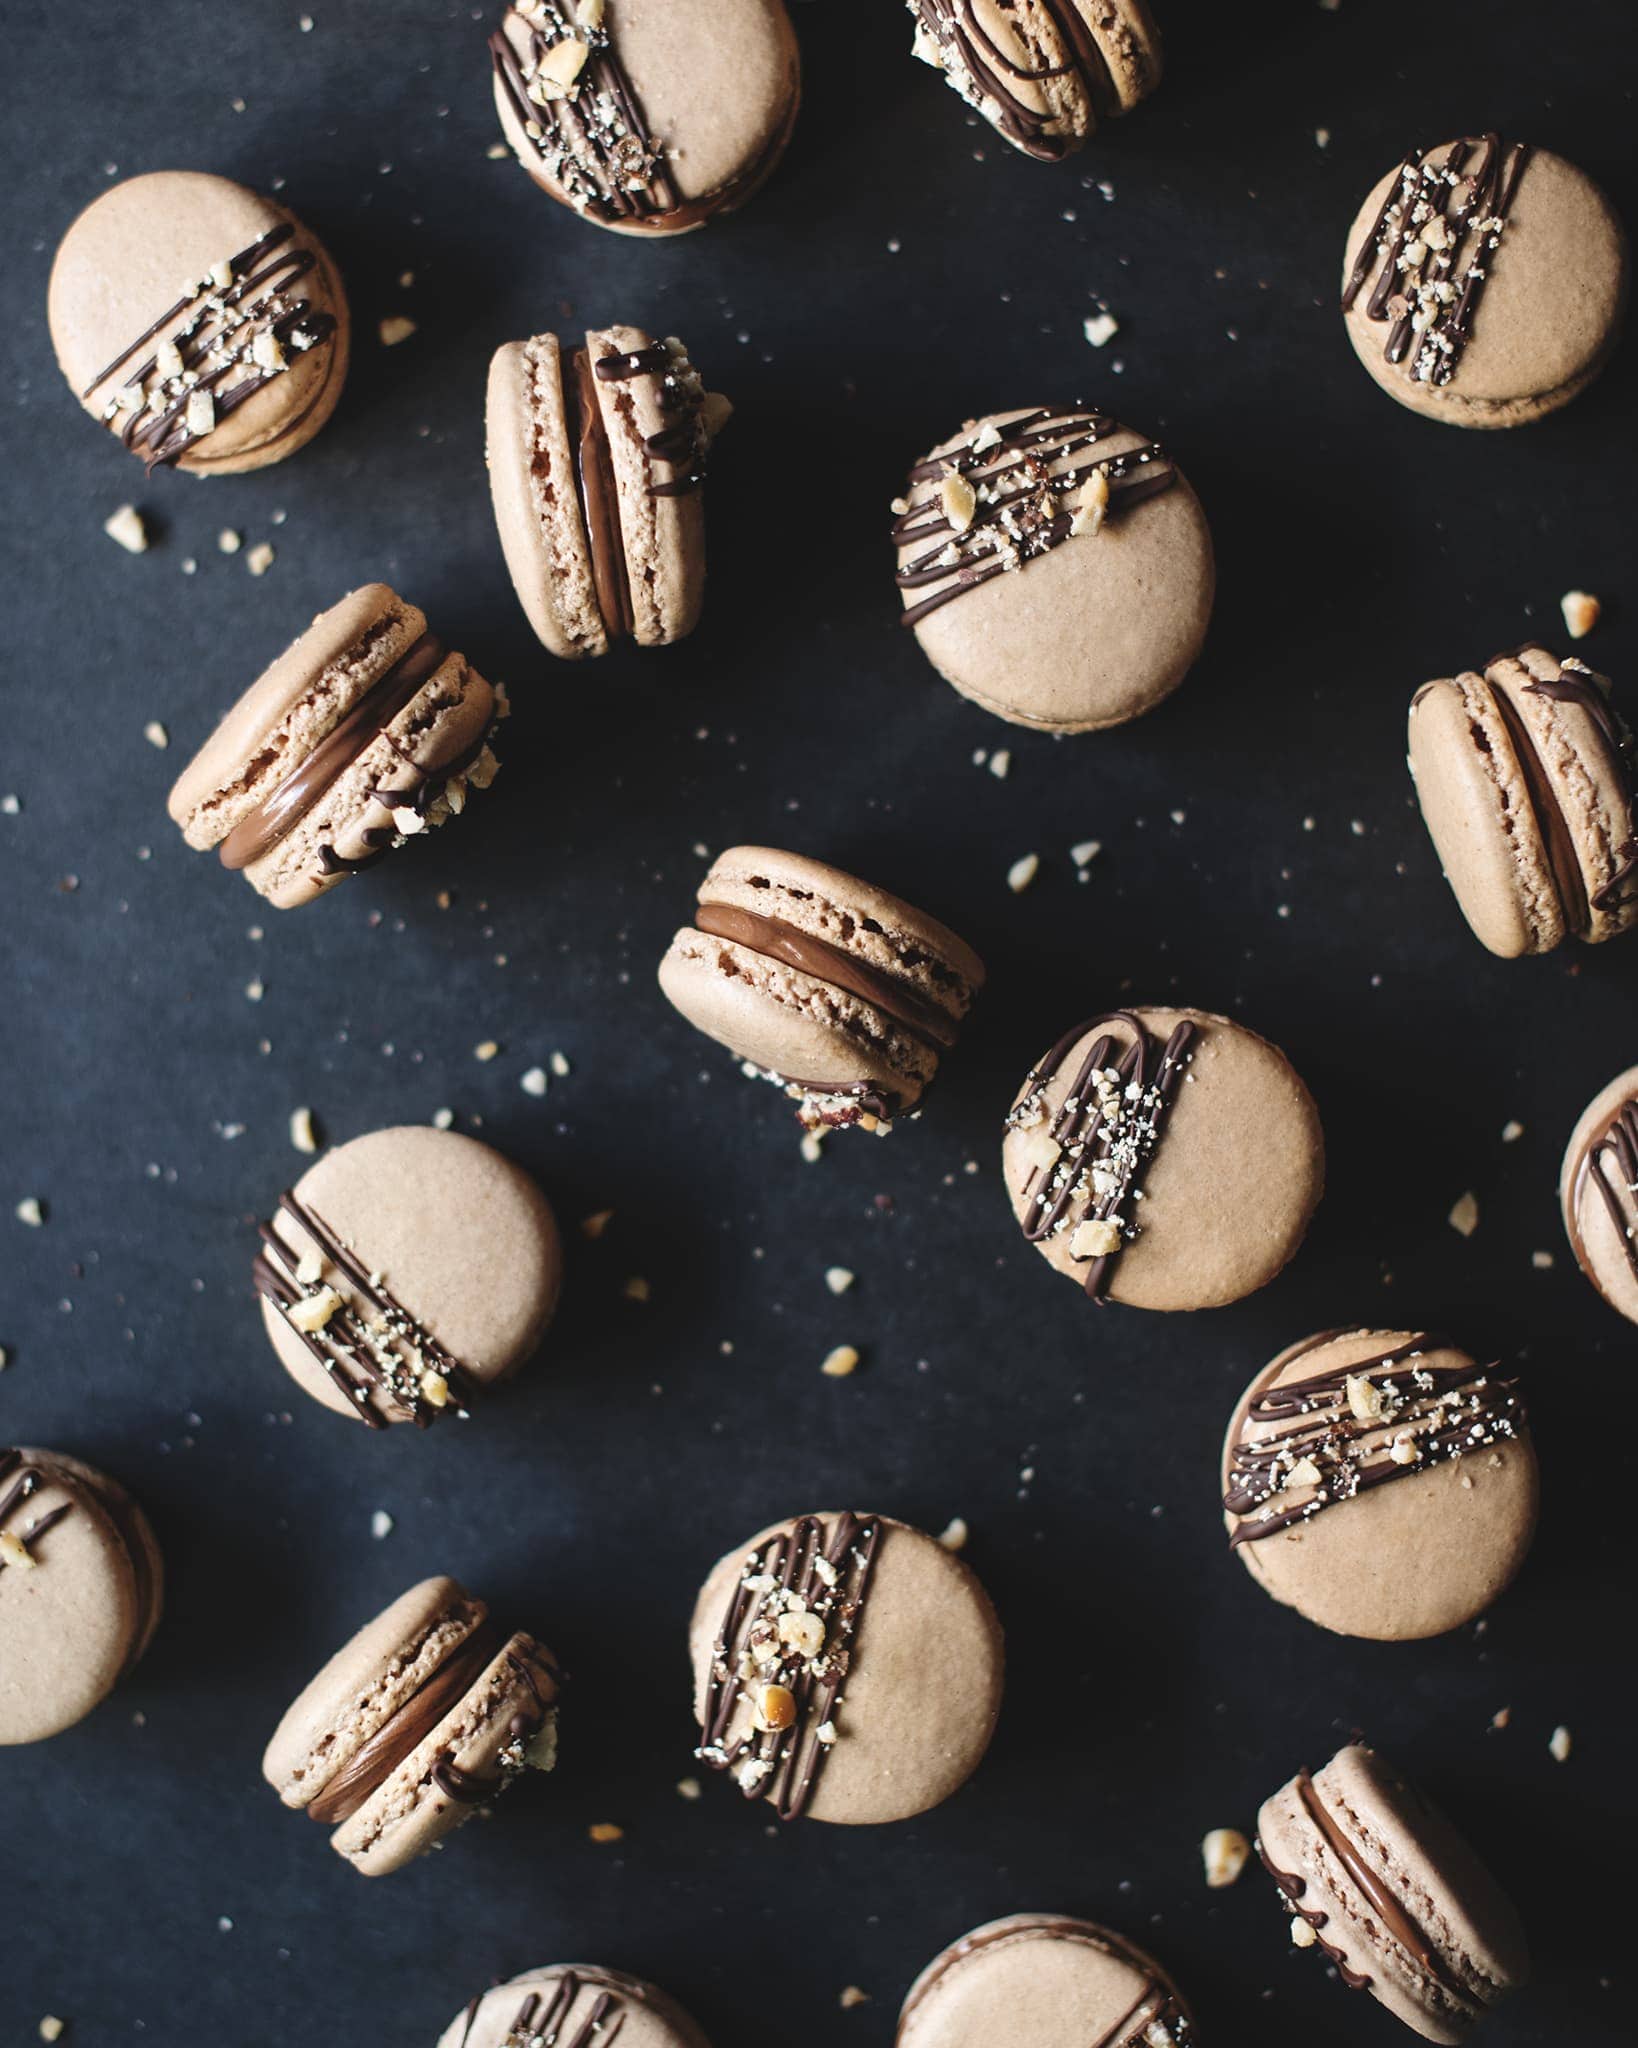 Ferrero Rocher macarons topped with dark chocolate drizzle and crushed hazelnuts scattered on a black background